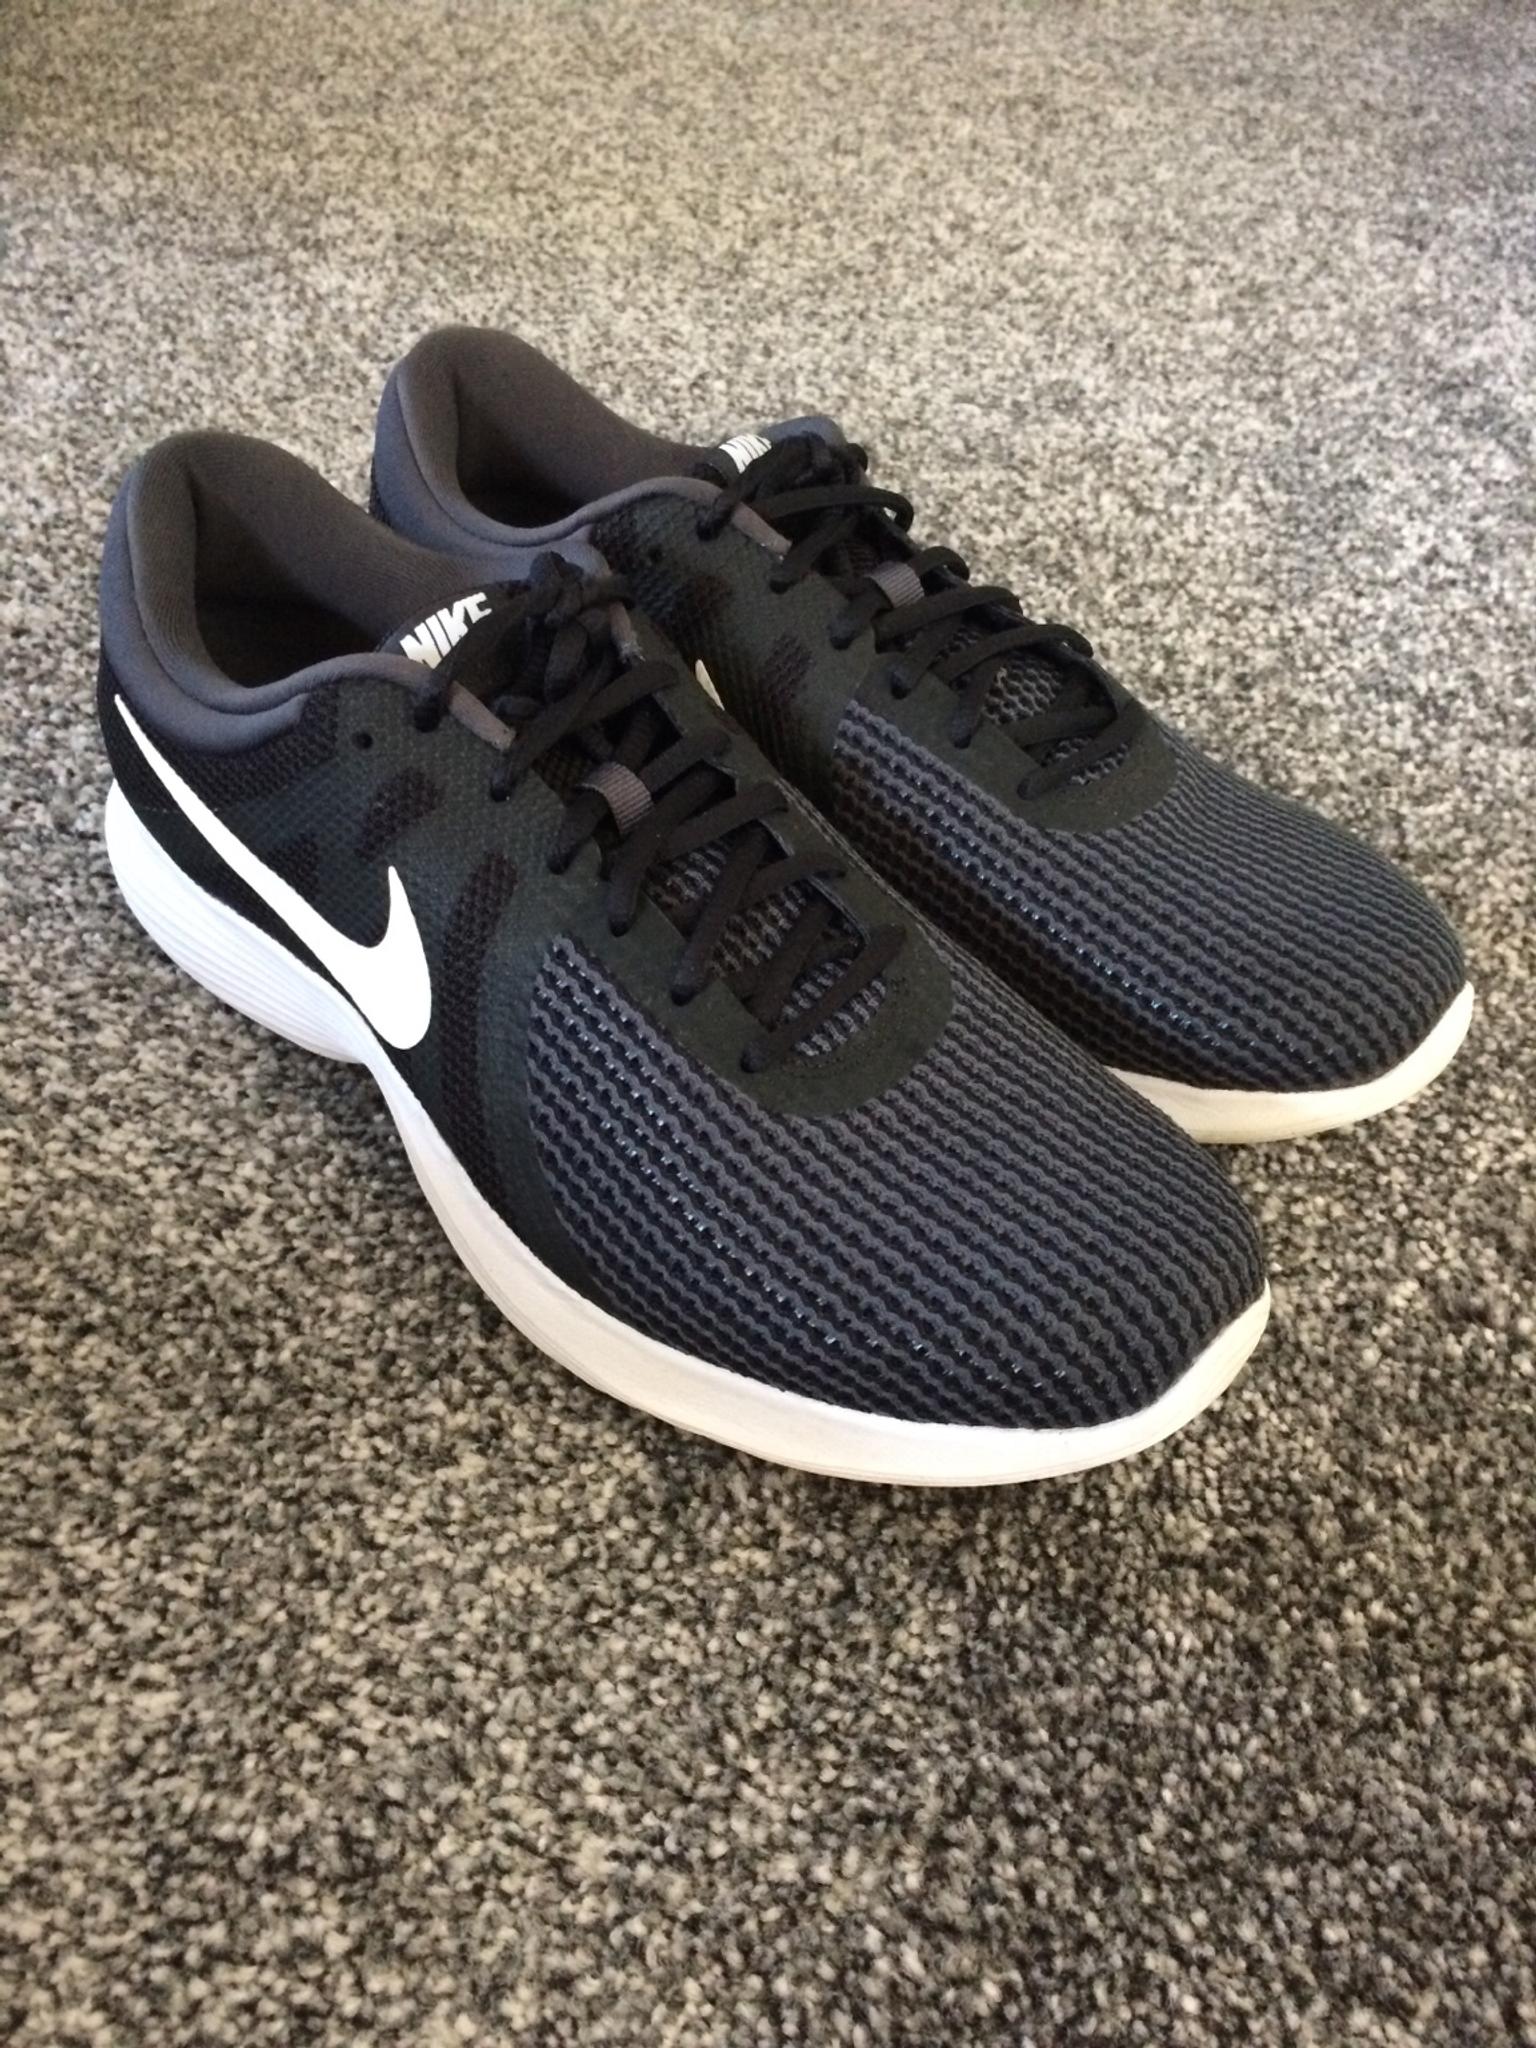 mens nike trainers size 10